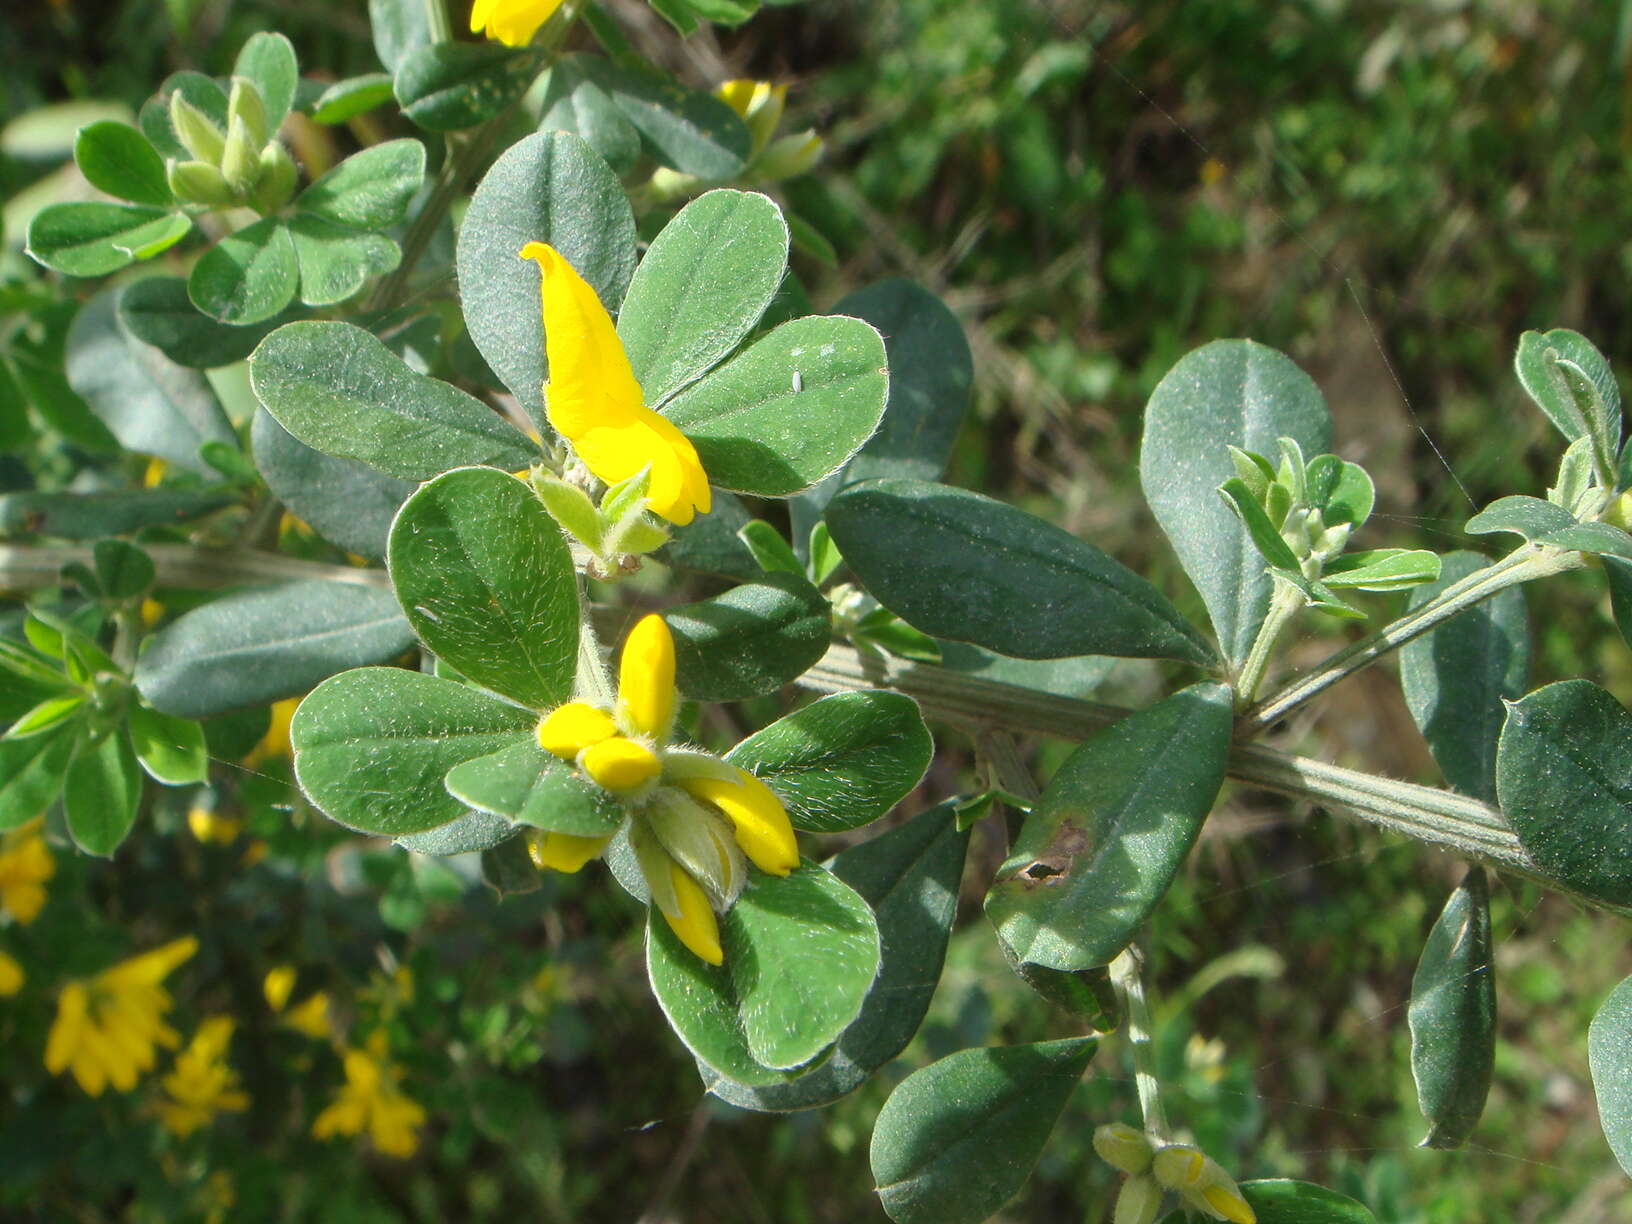 Image of French broom